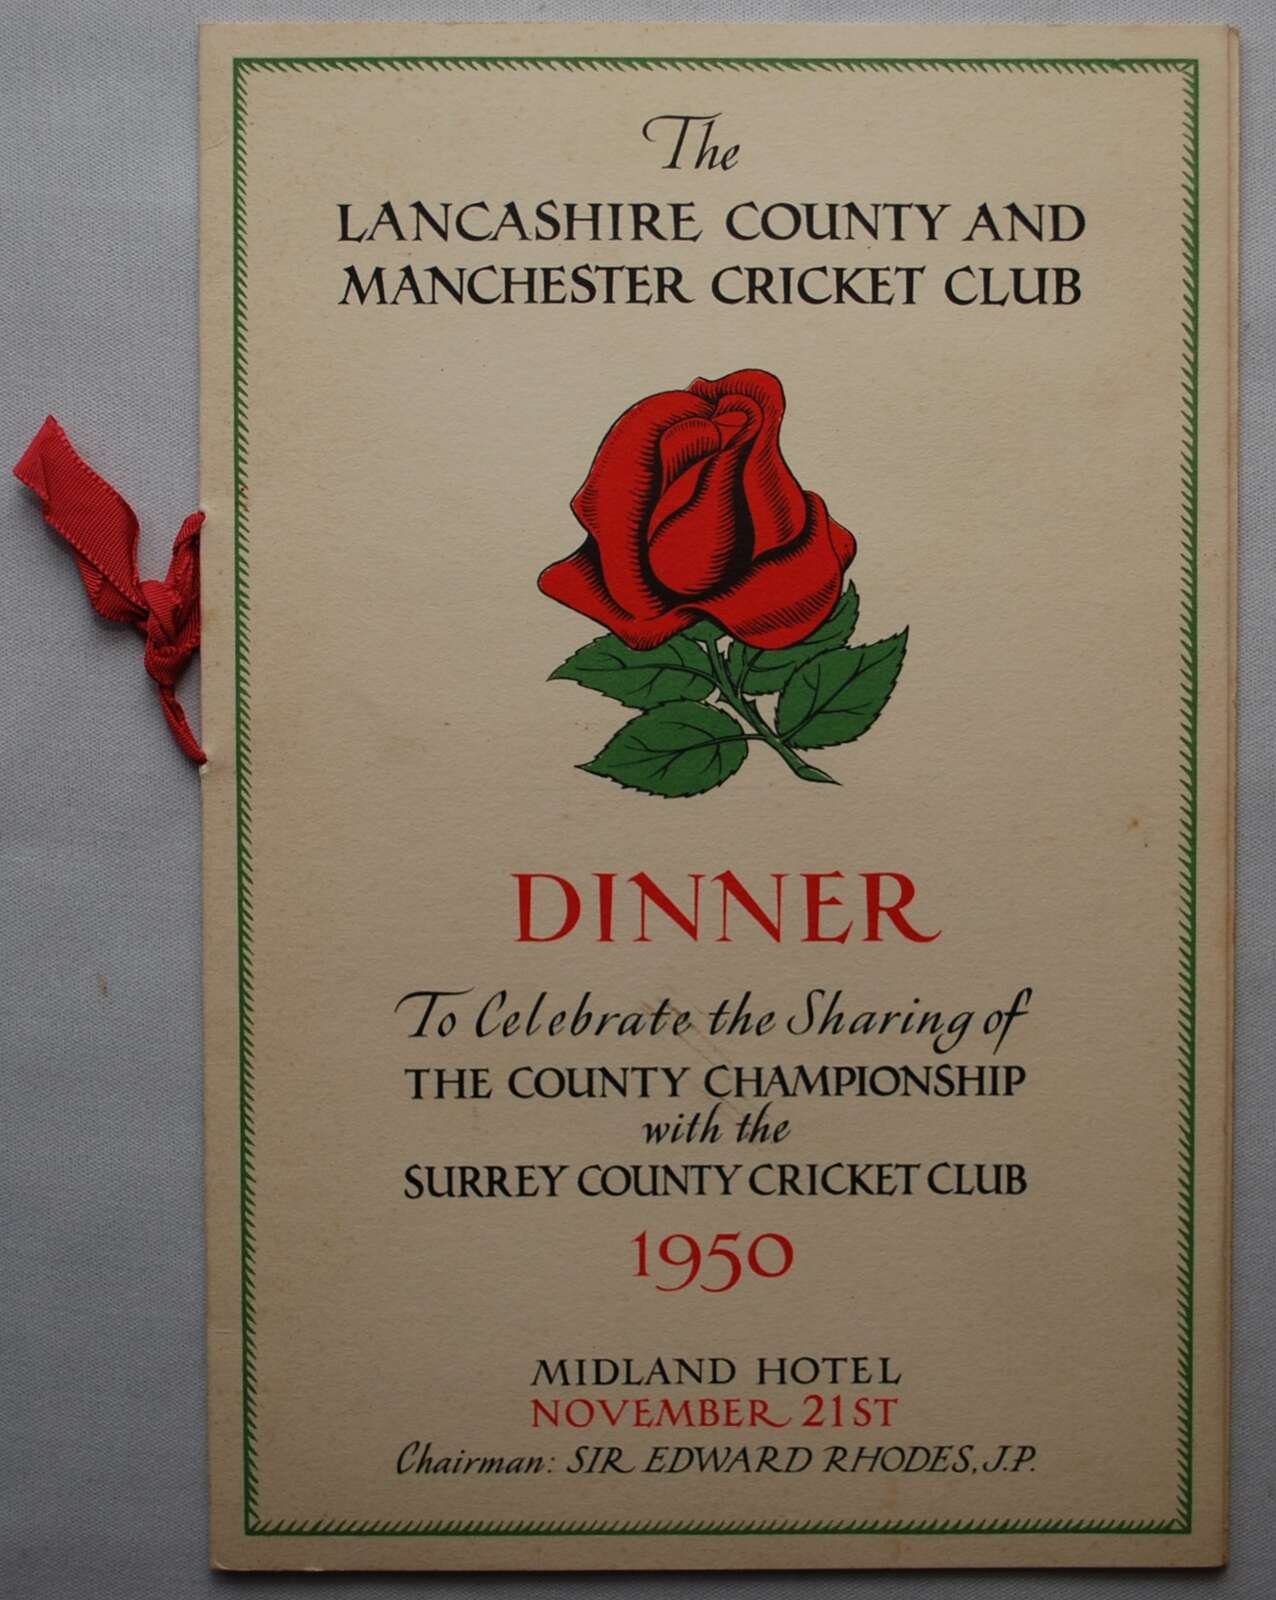 Lancashire C.C.C. ?County Champions? 1930. Official Lancashire County and Manchester Cricket Club